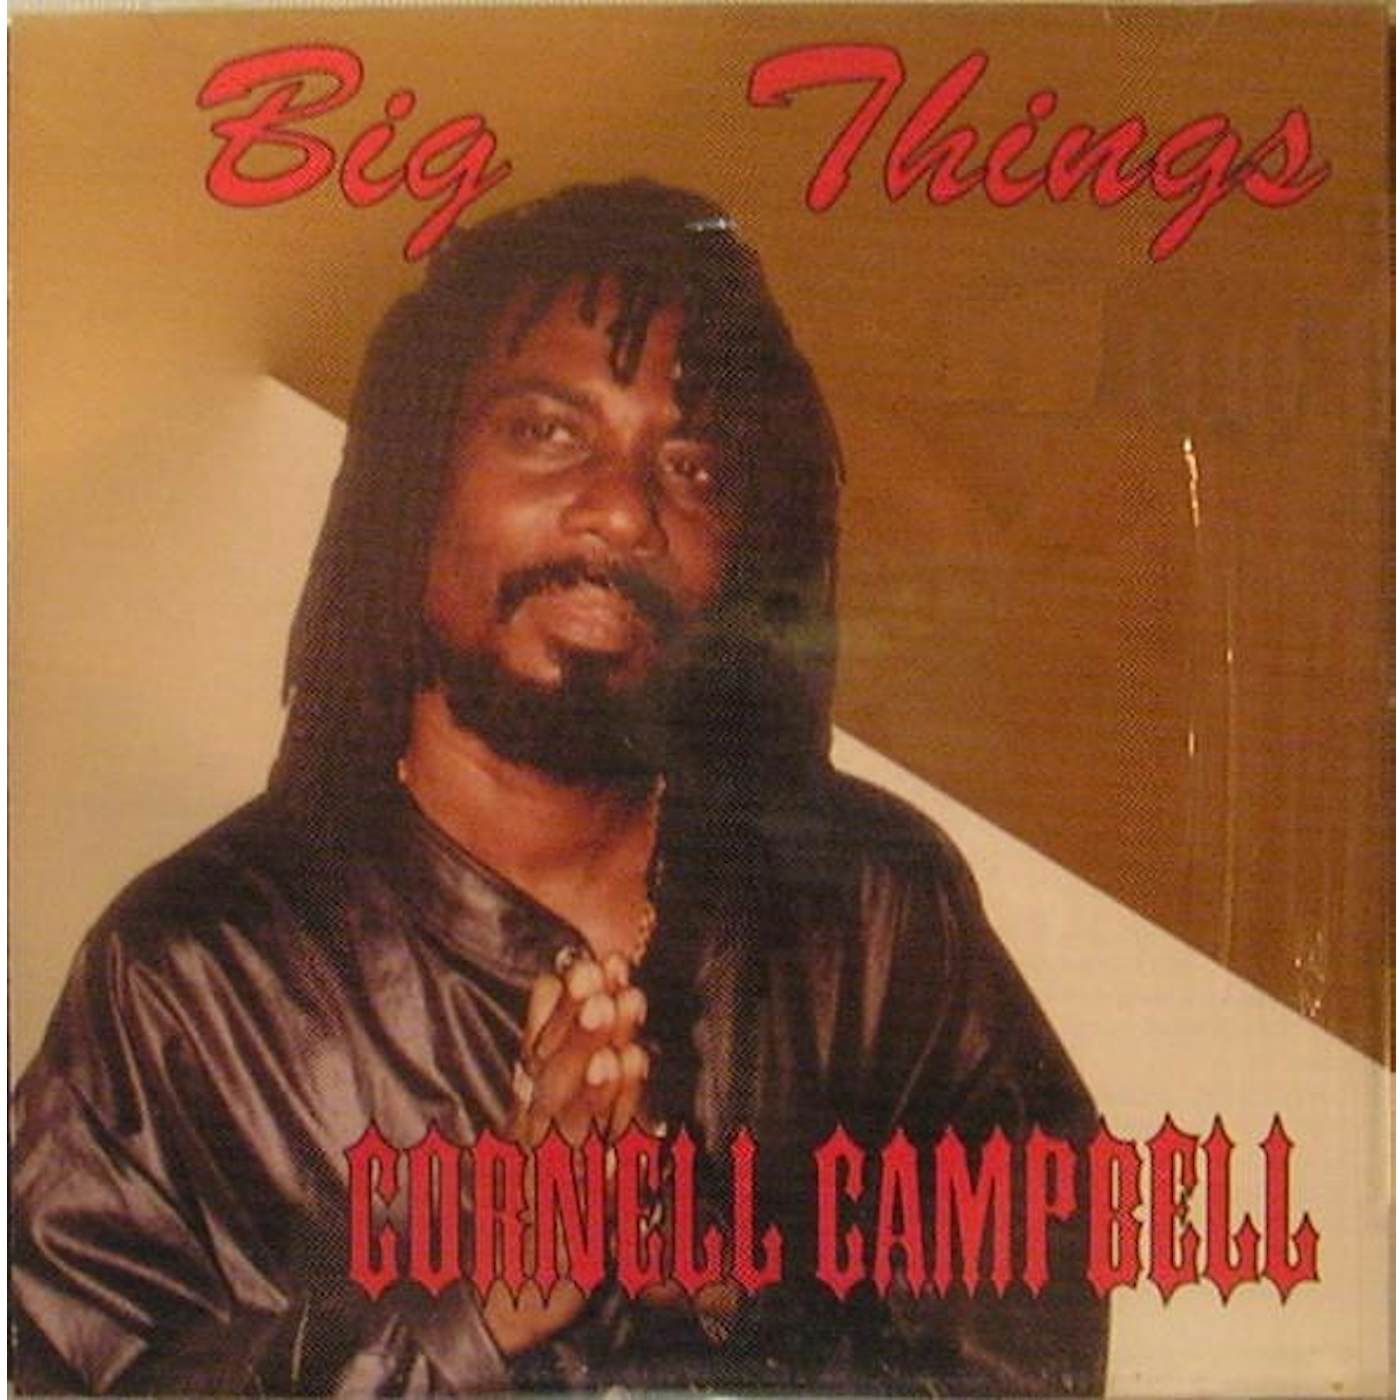 Cornell Campbell BIG THINGS CD